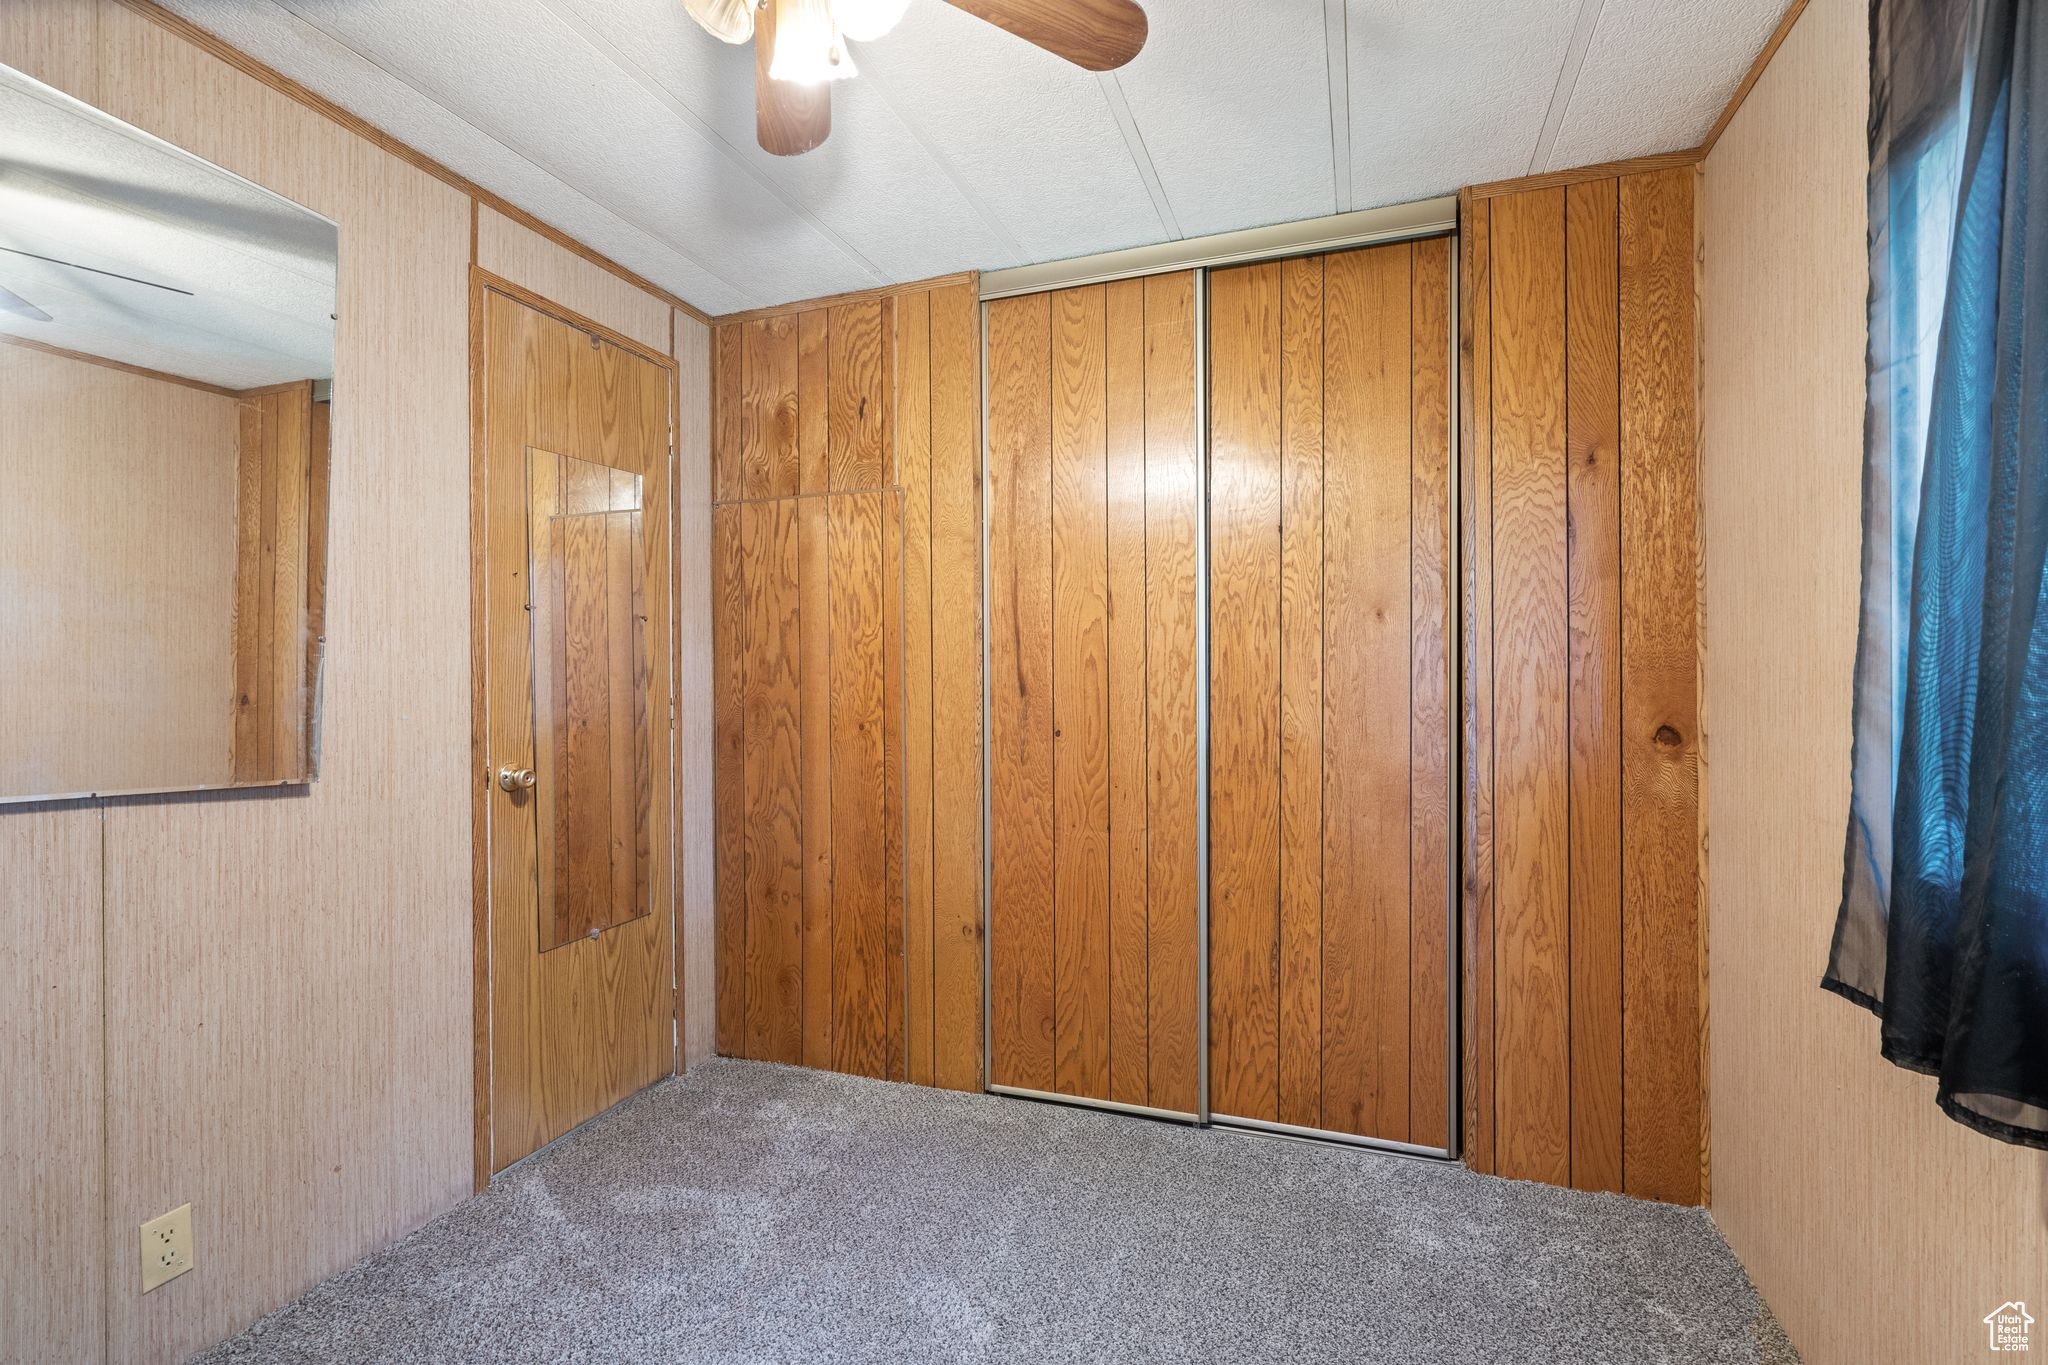 Carpeted spare room featuring wooden walls and ceiling fan